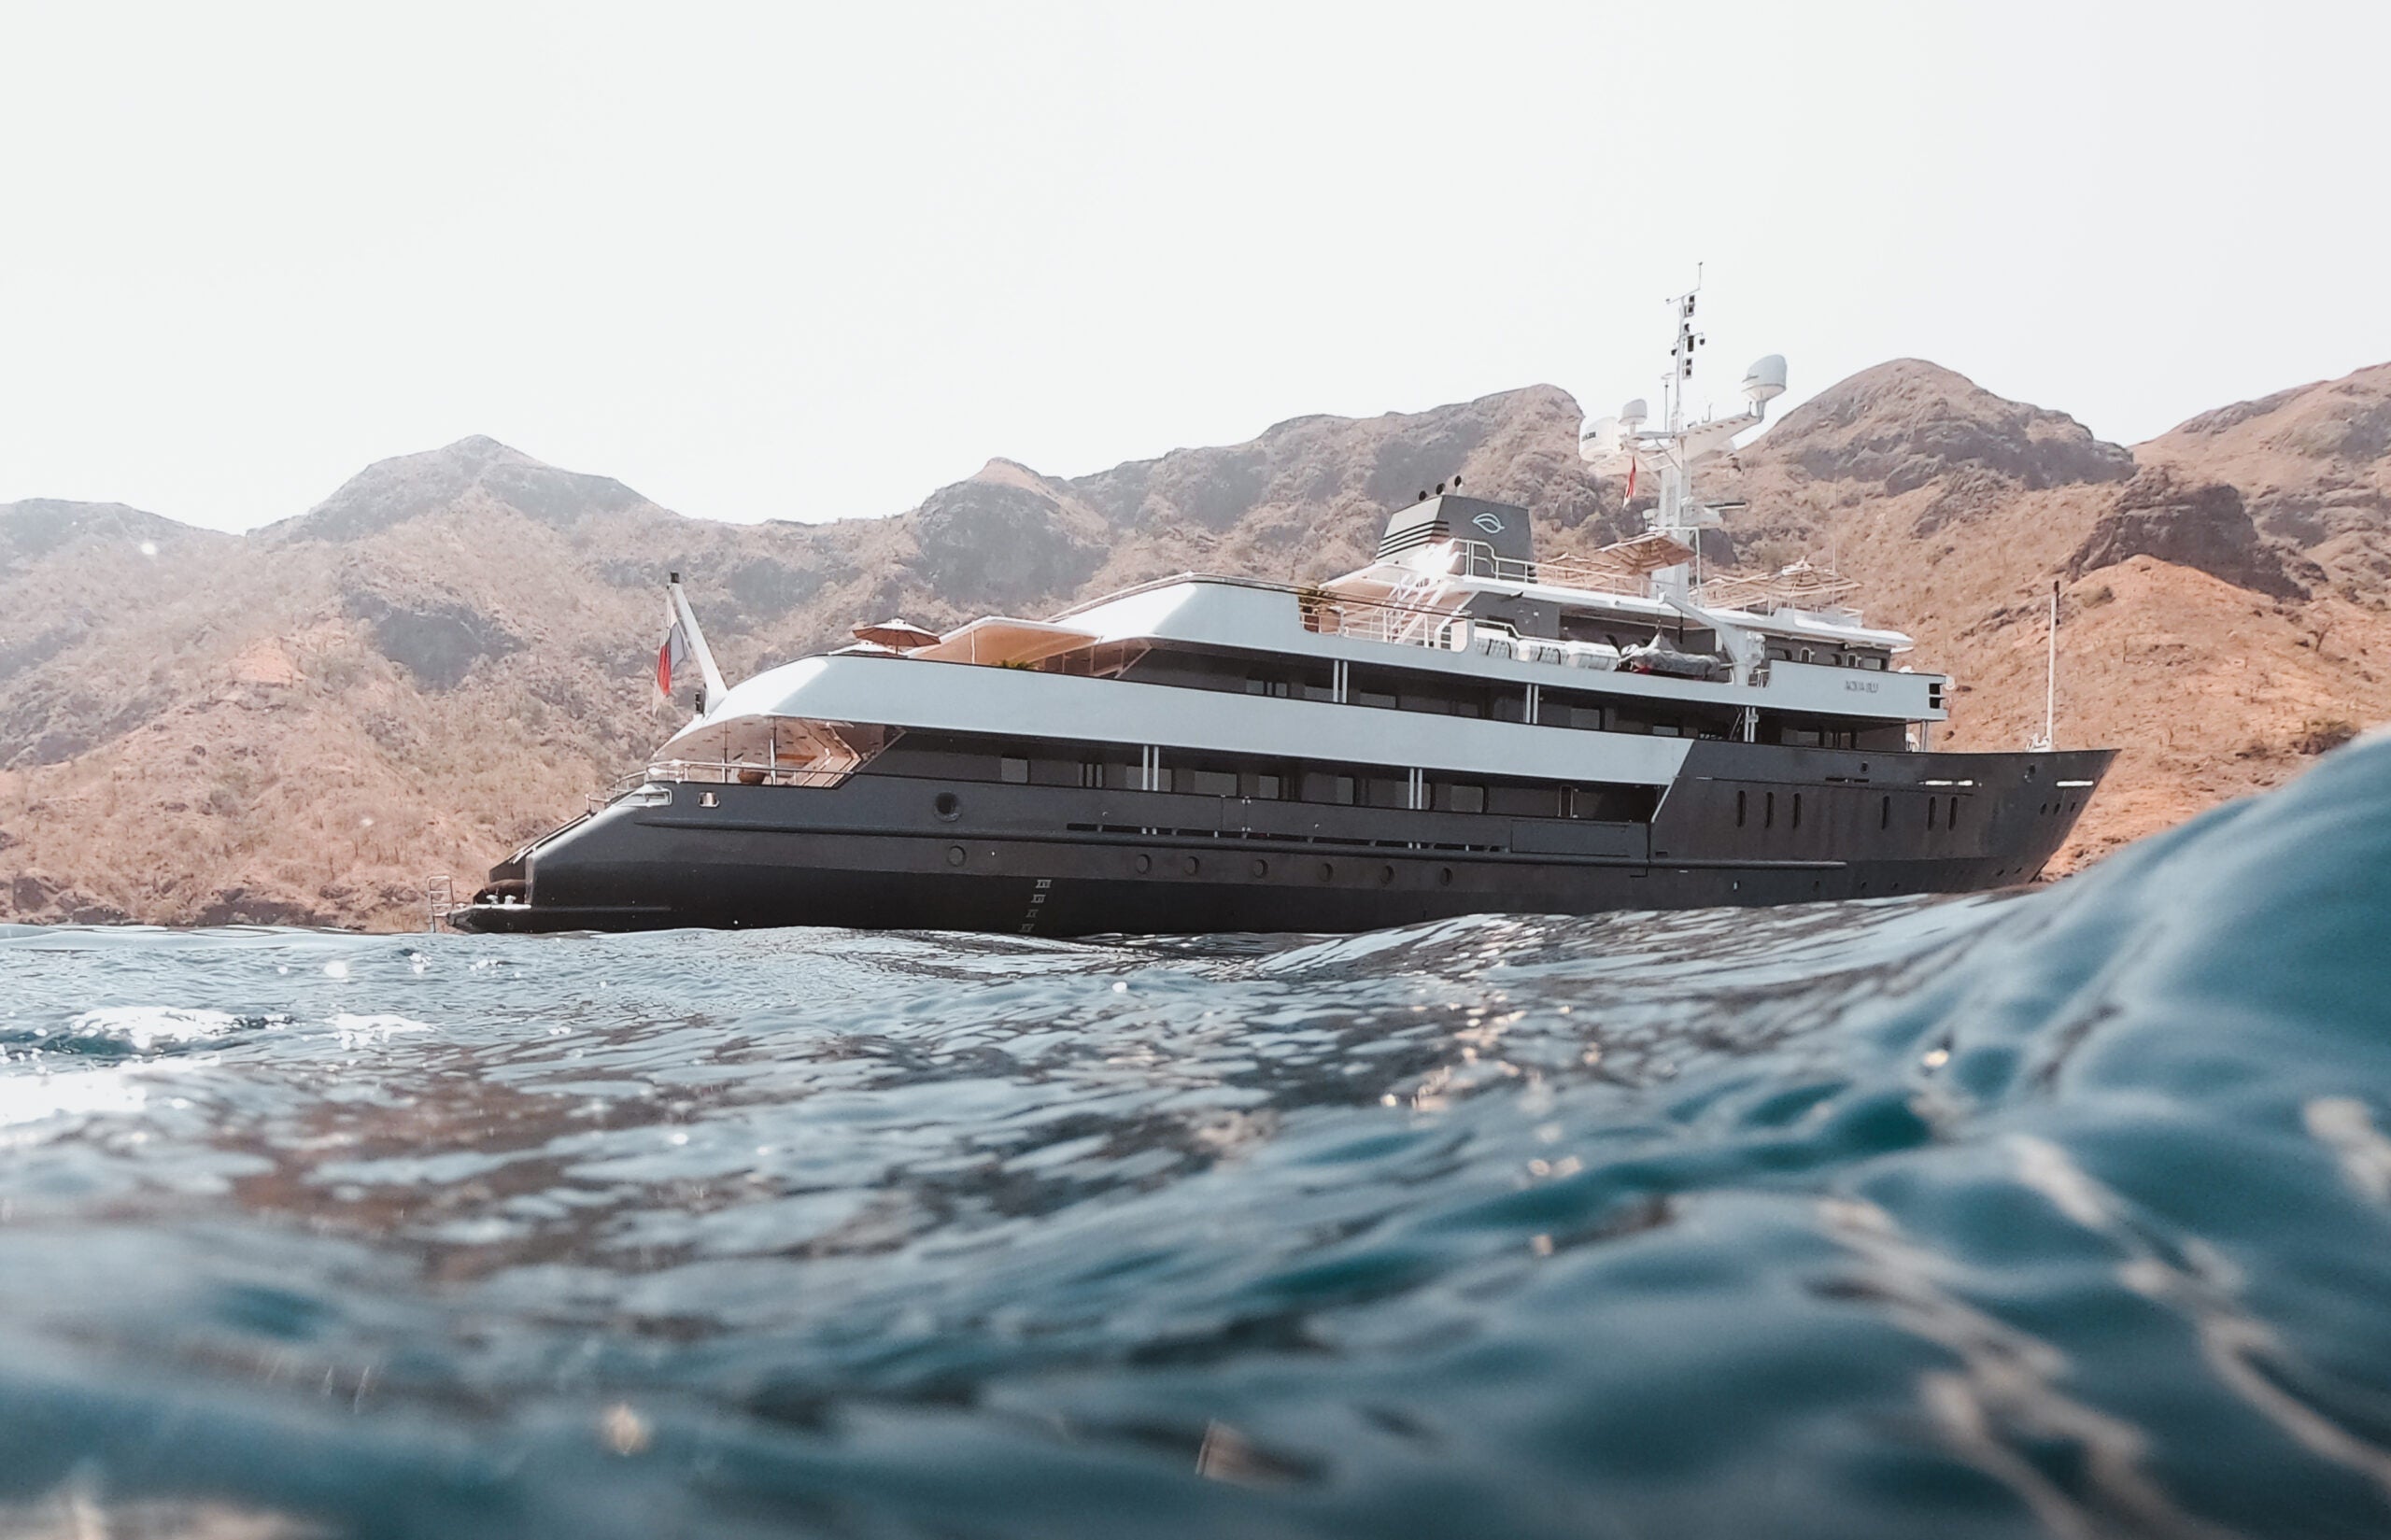 Aqua Expeditions CEO on the Evolution of Luxury